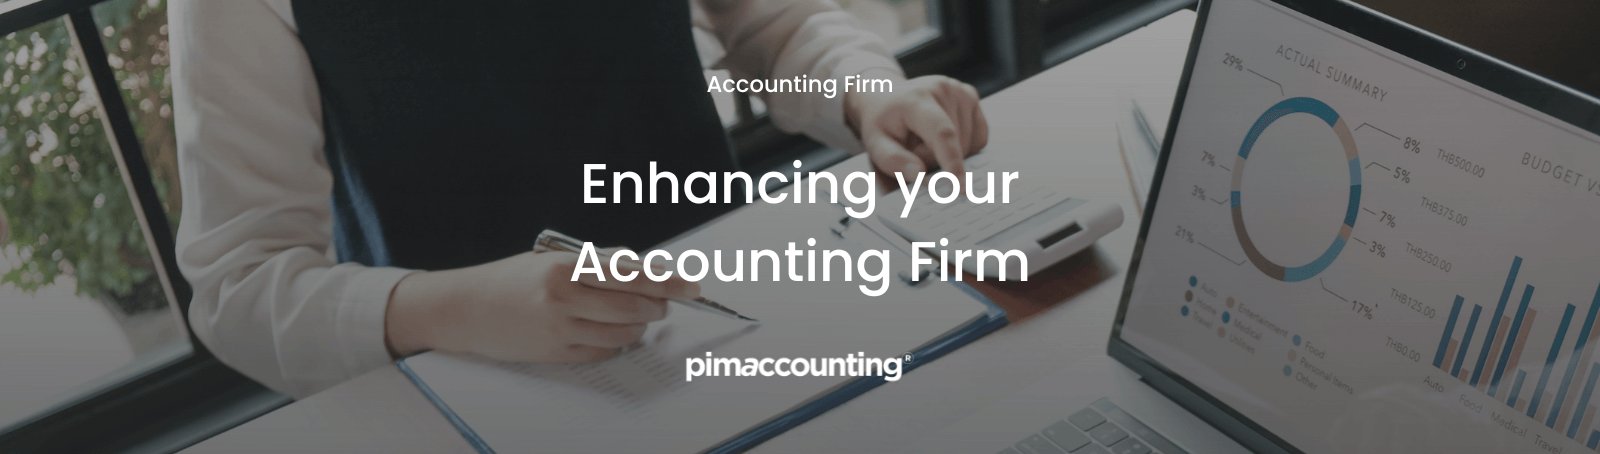 Enhancing your Accounting Firm